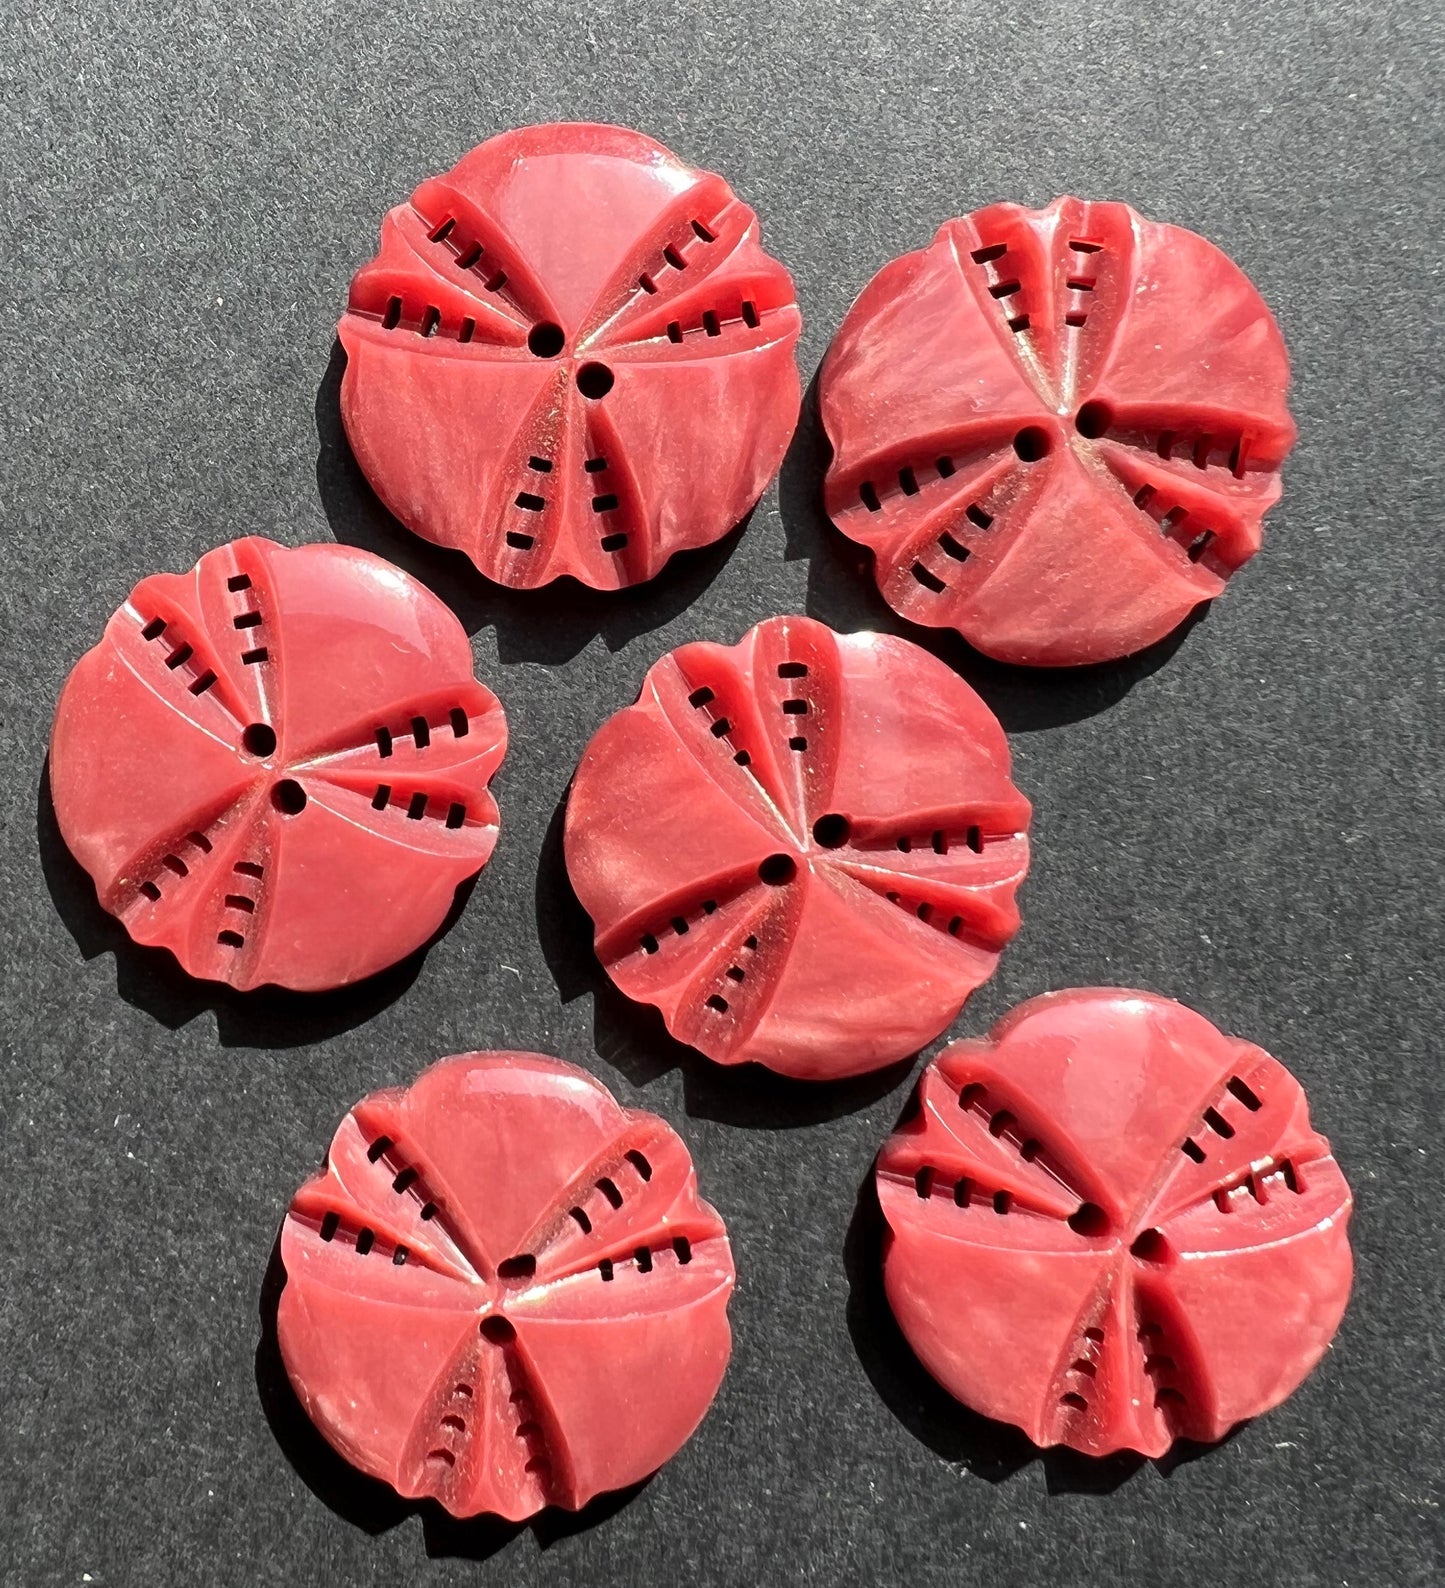 2.2cm Vintage 1930s Red Ochre Buttons - 6 of them